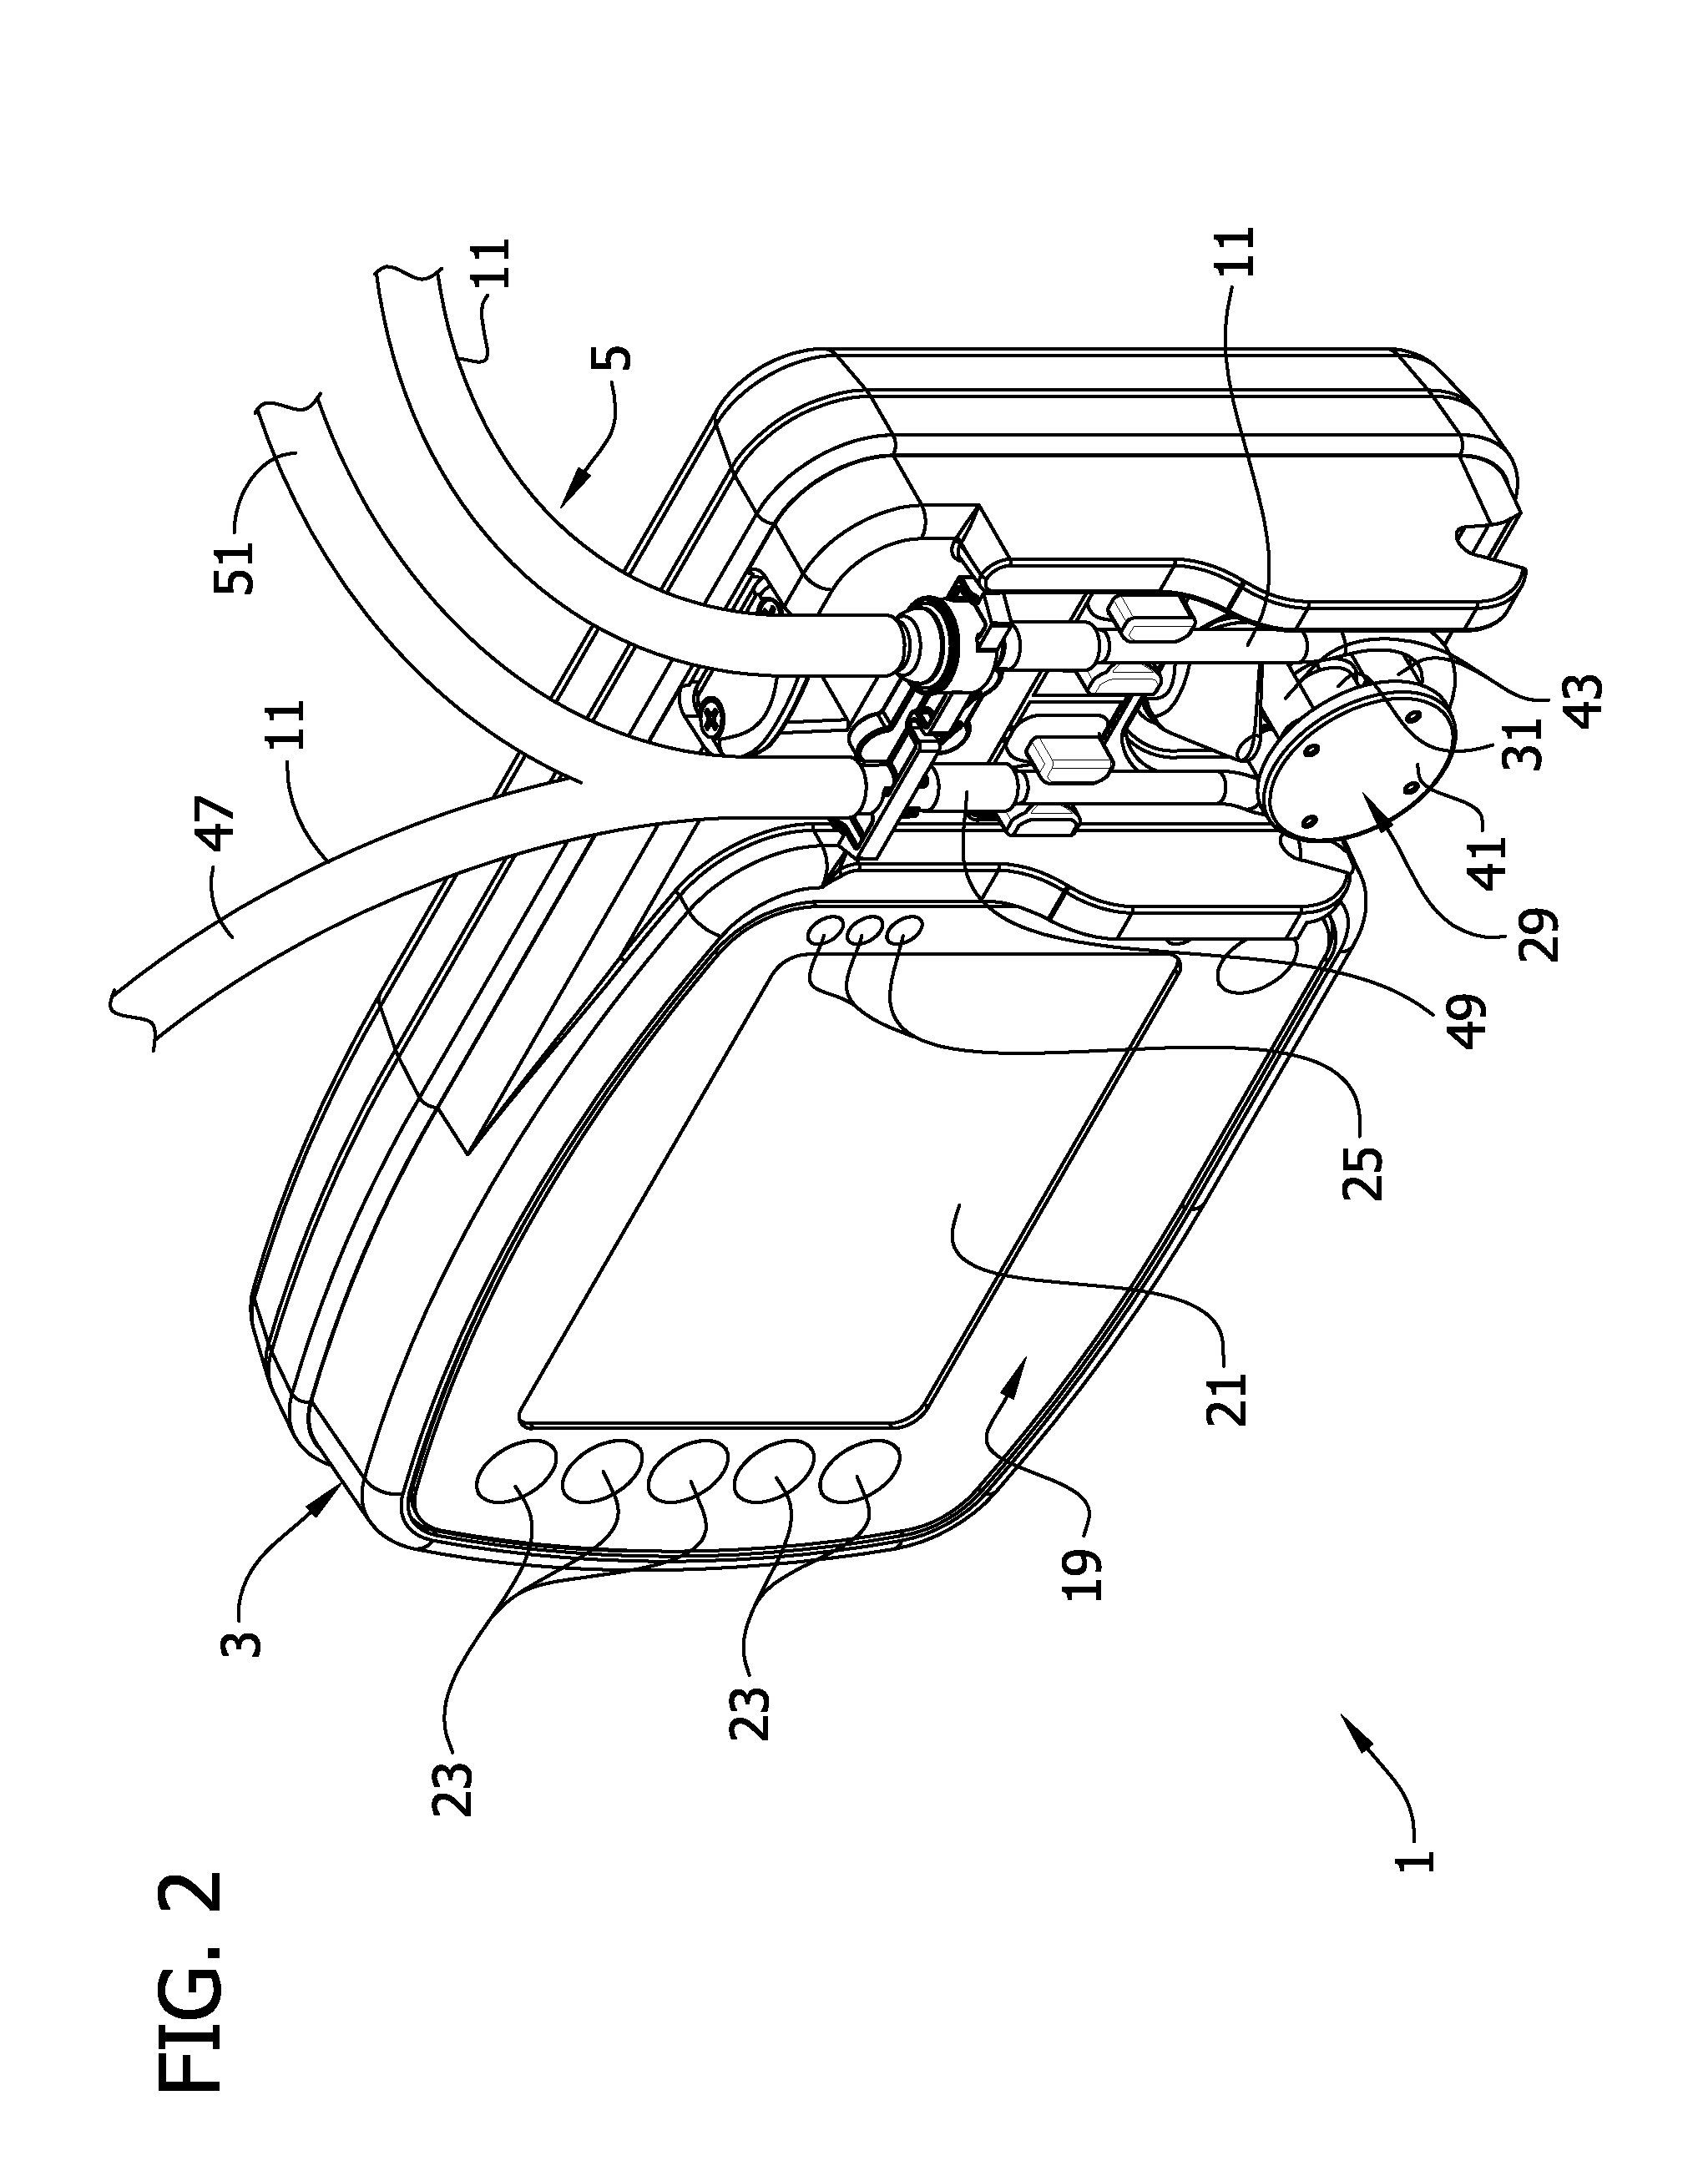 Feeding Rate Compensated Pump and Related Methods Therefor